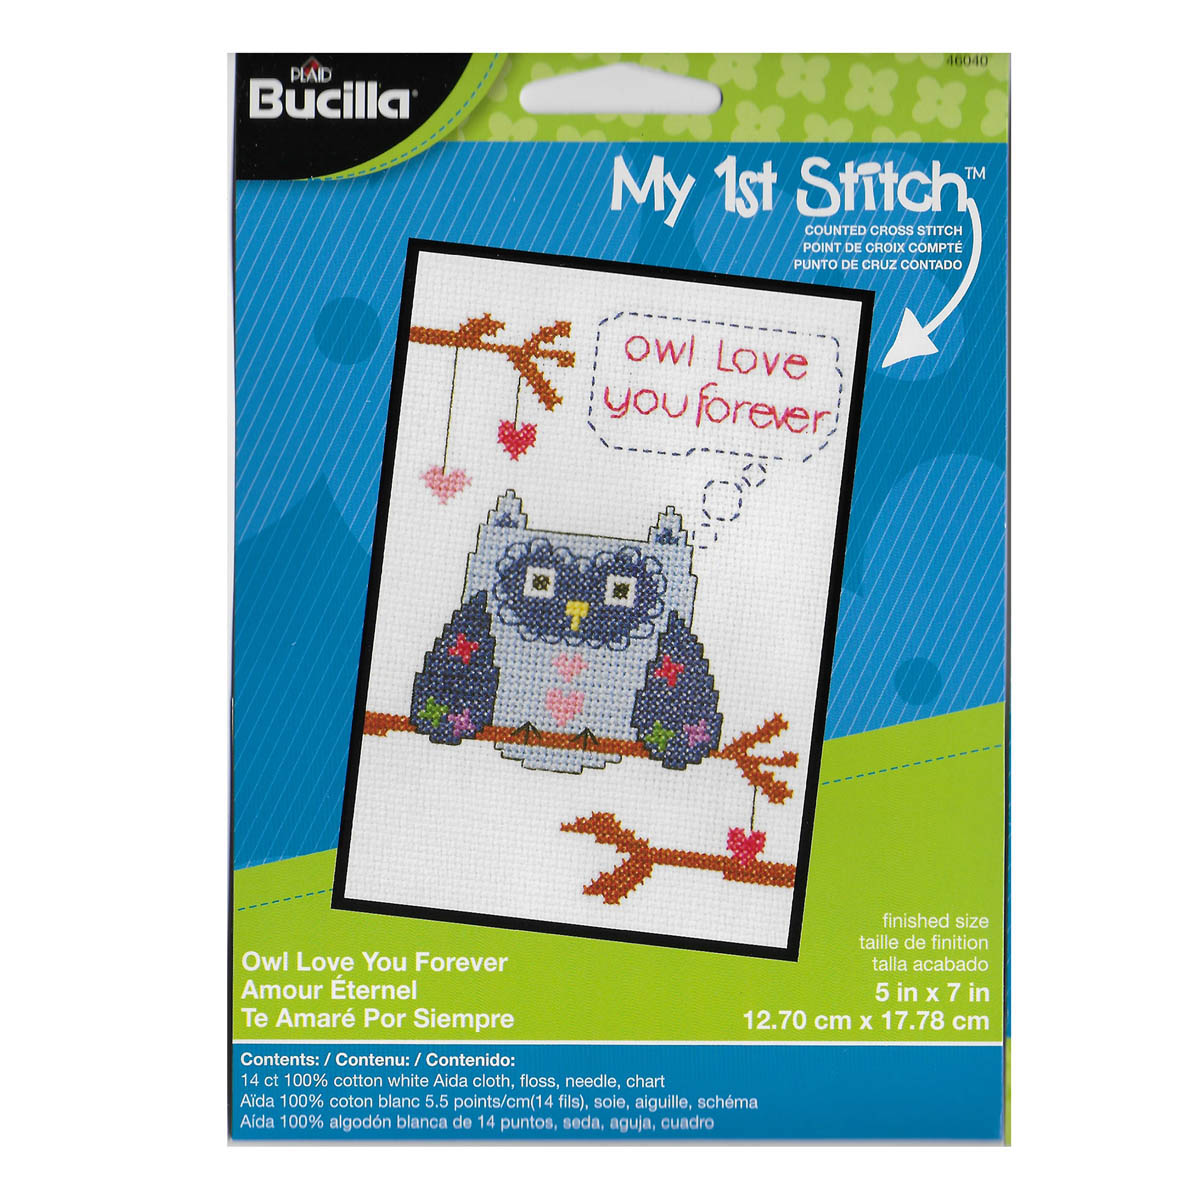 Bucilla ® My 1st Stitch™ - Counted Cross Stitch Kits - Owl Love You Forever - 46040